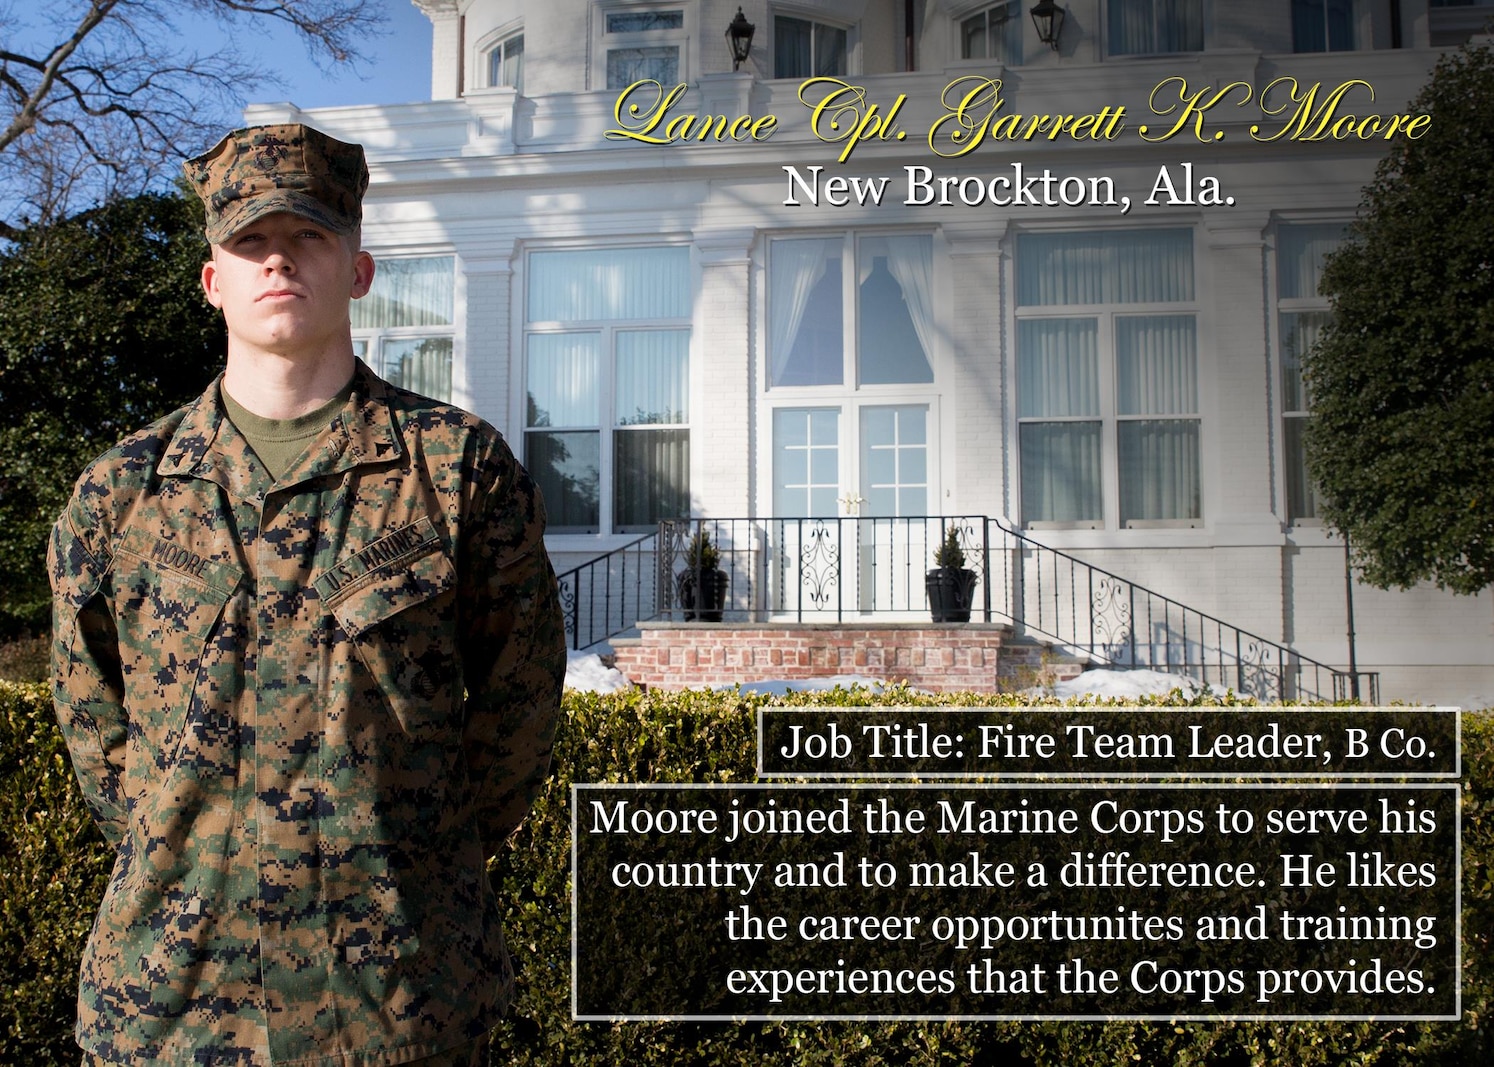 Lance Cpl. Garret Moore
New Brockton, Ala.
Job Title: Fire Team Leader, B Co.
Moore joined the Marine Corps to serve his country and to make a difference. He likes the career opportunites and training experiences that the Corps provides.
(Official Marine Corps graphic by Cpl. Chi Nguyen/Released)